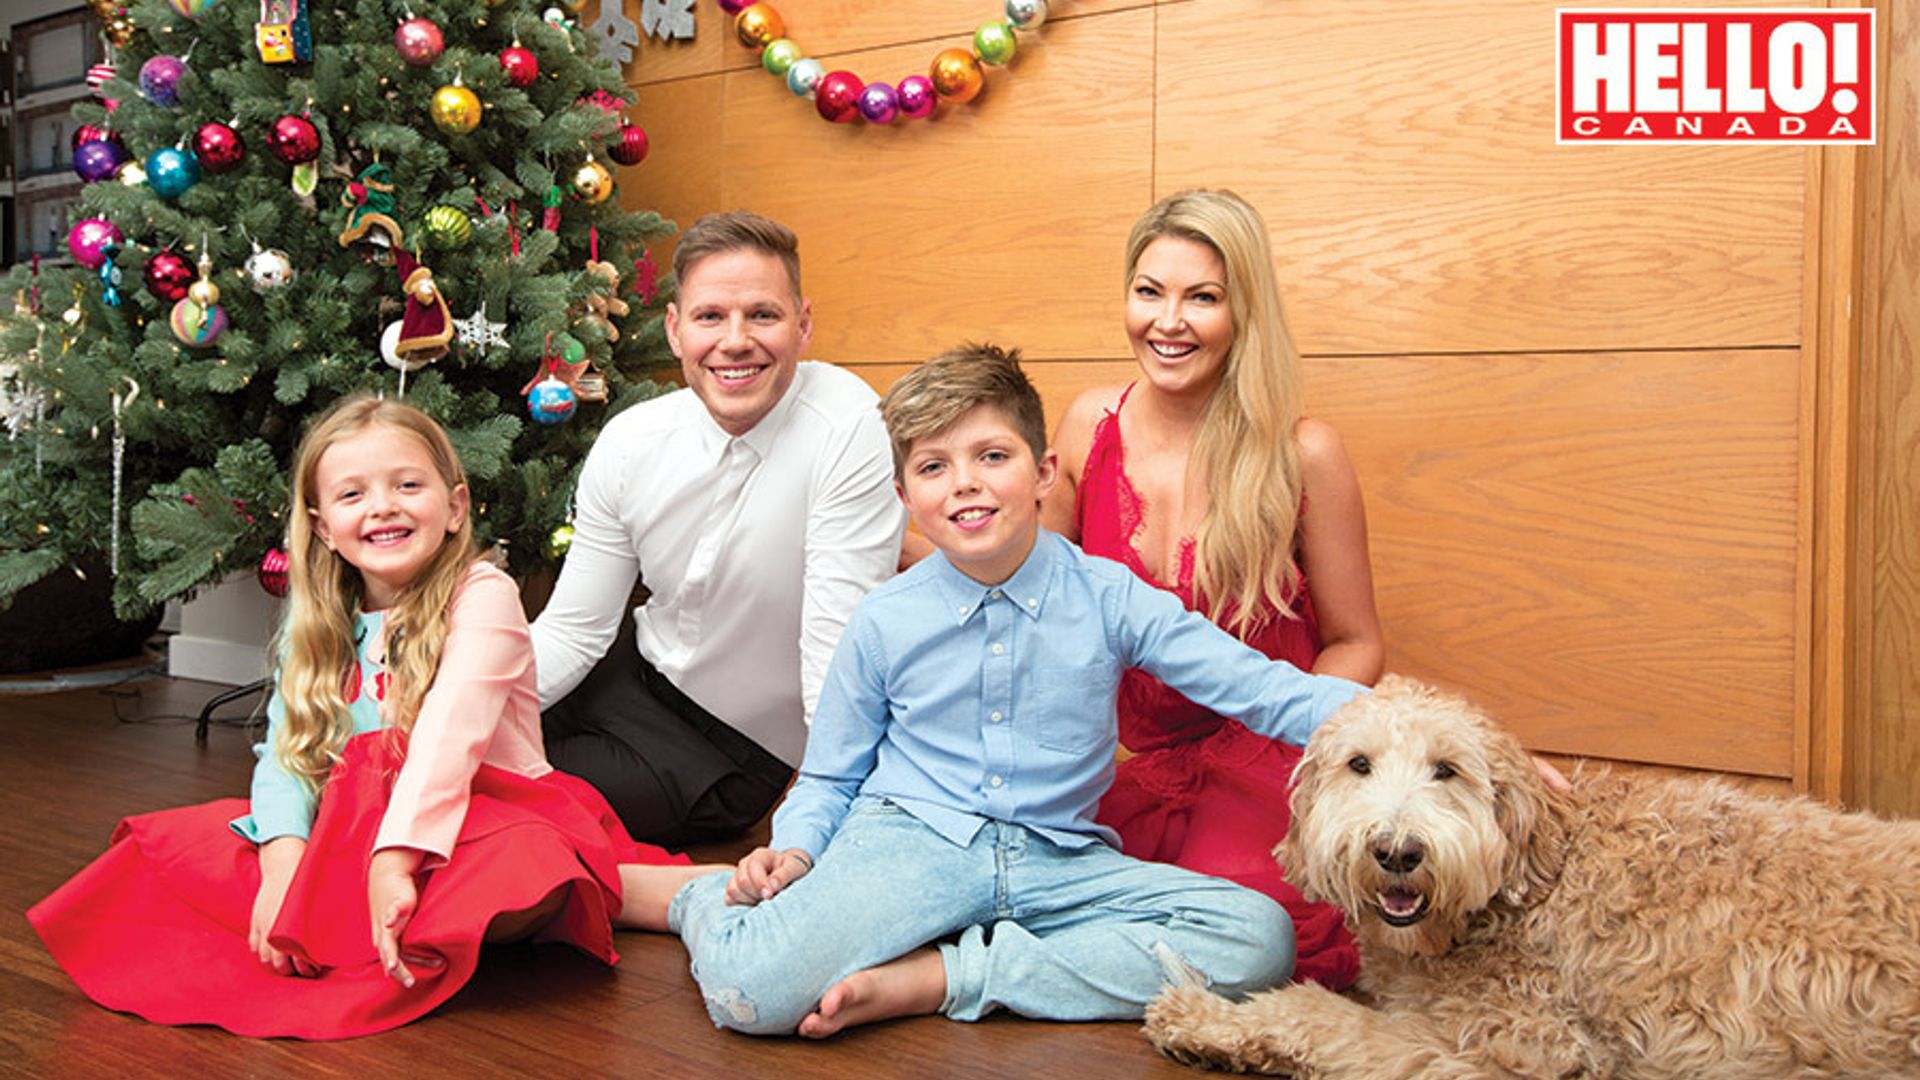 Home for the holidays! Cheryl Hickey counts down to Christmas in her first family photo shoot